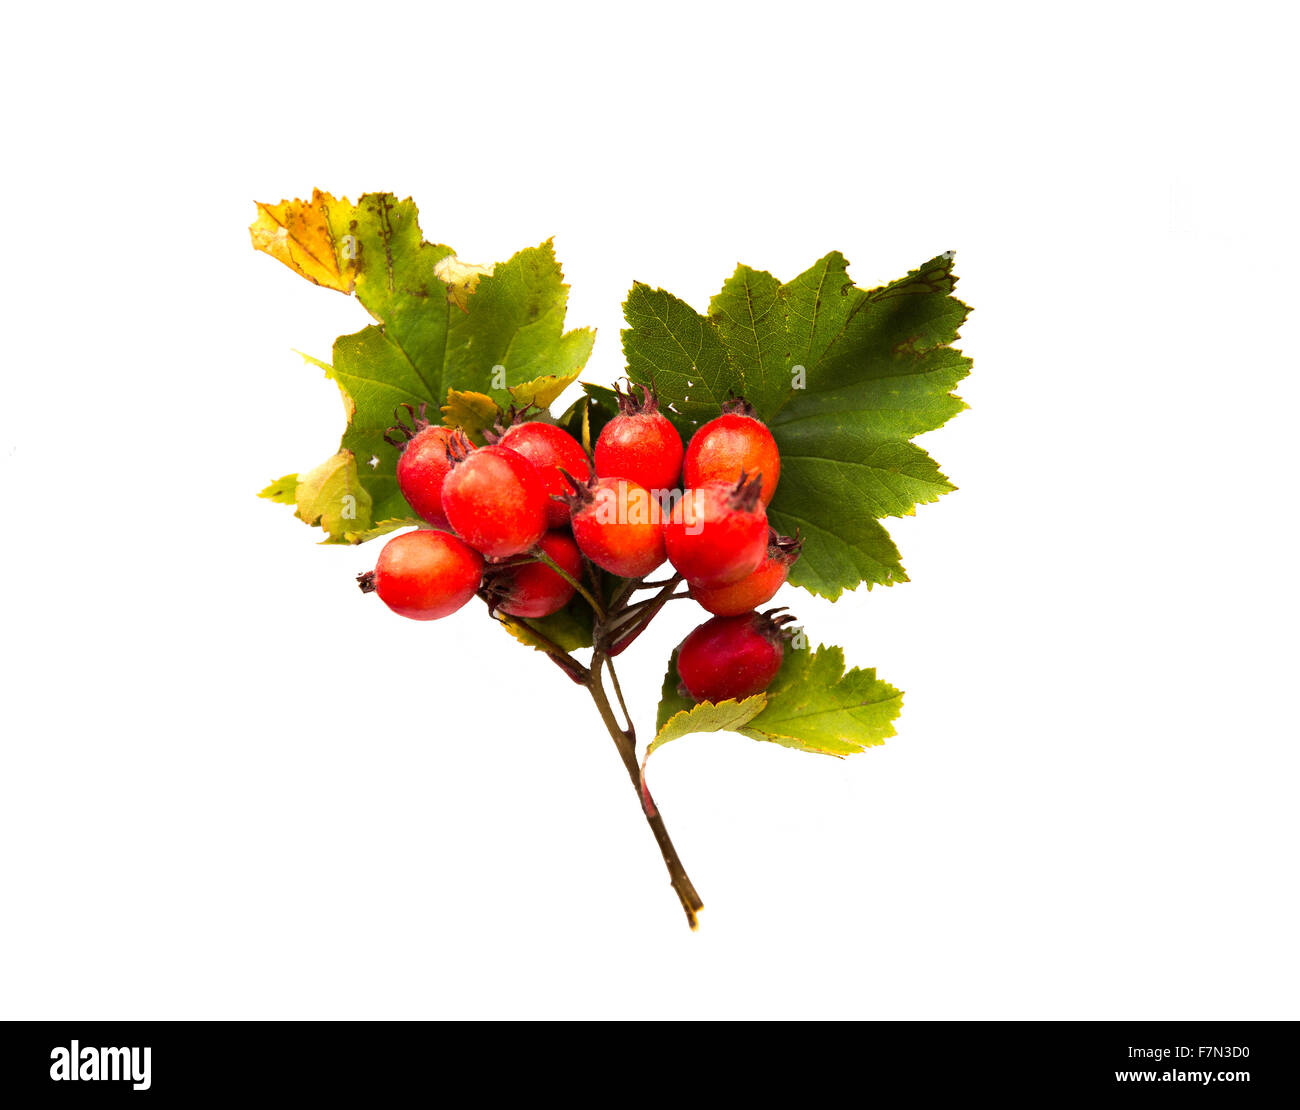 hawthorn bunch with red ripe berries Stock Photo